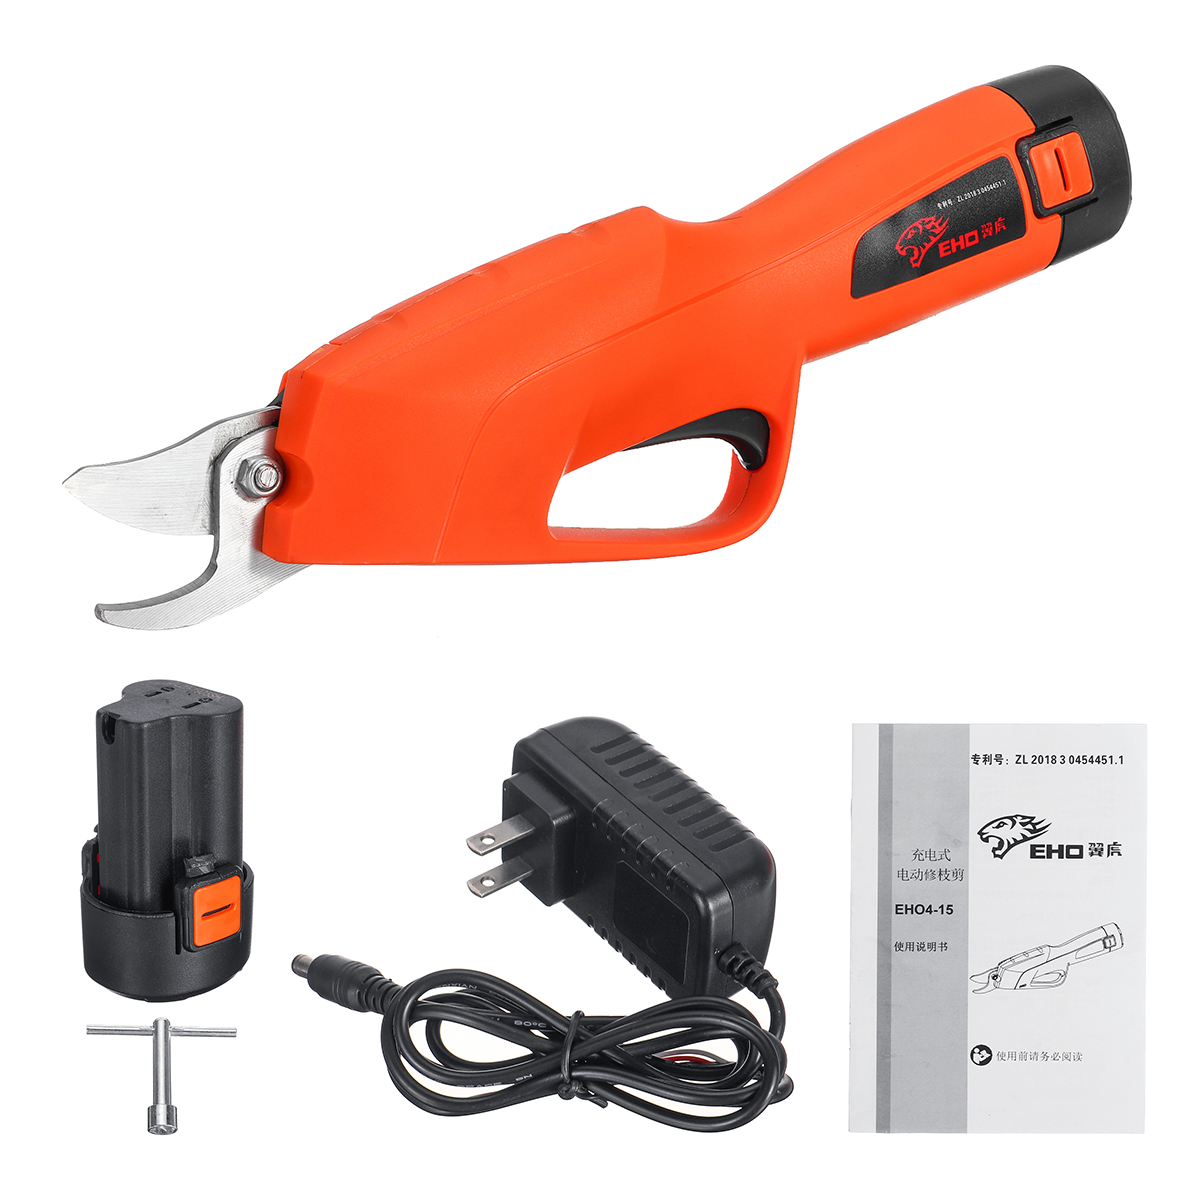 12V-Cordless-Rechargeable-Power-Pruner-Tree-Trimmers-Secateurs-Cutting-Scissors-Electric-Pruning-Bra-1559733-7